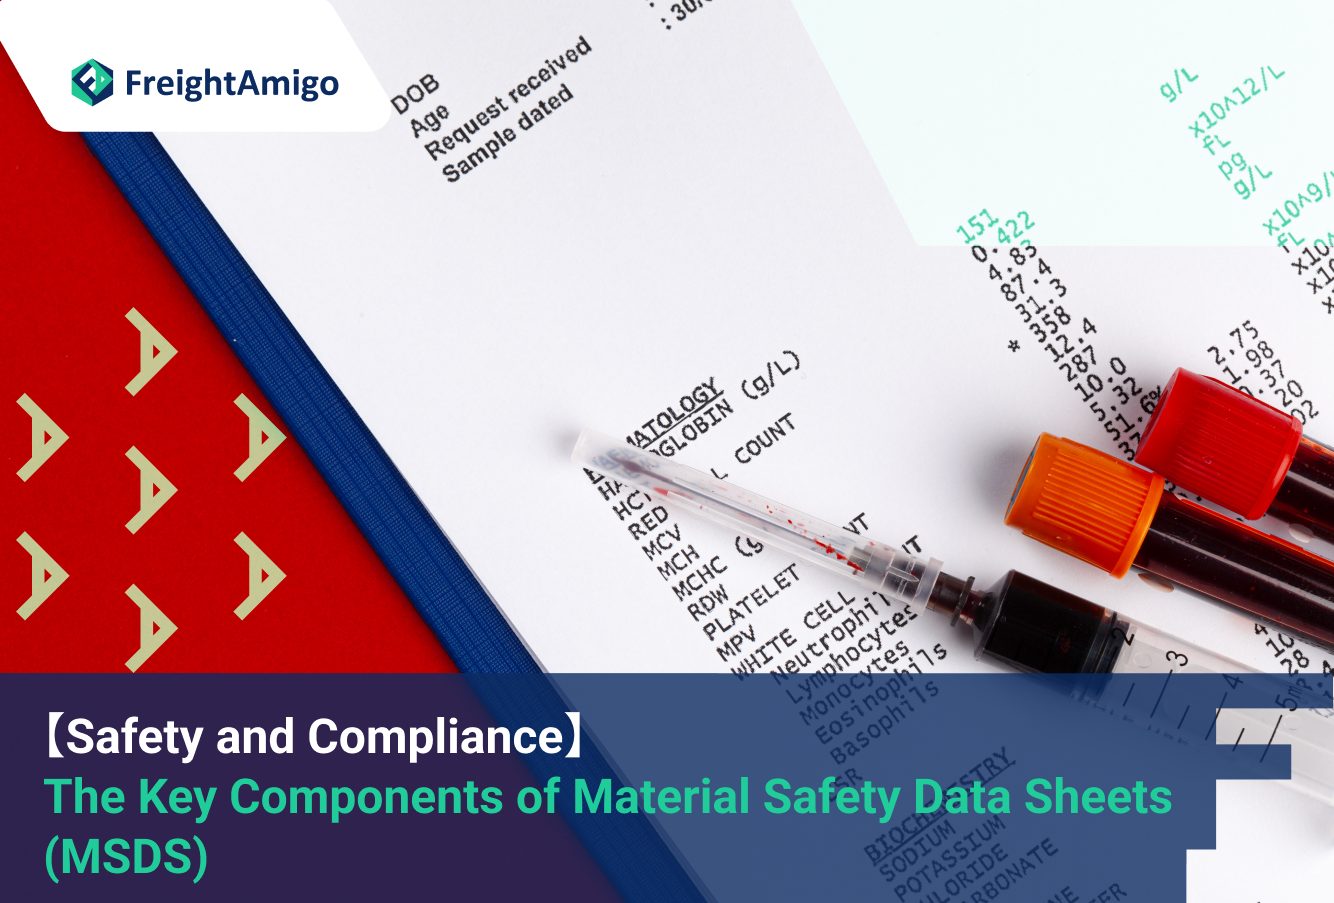 The Key Components of Material Safety Data Sheets (MSDS)